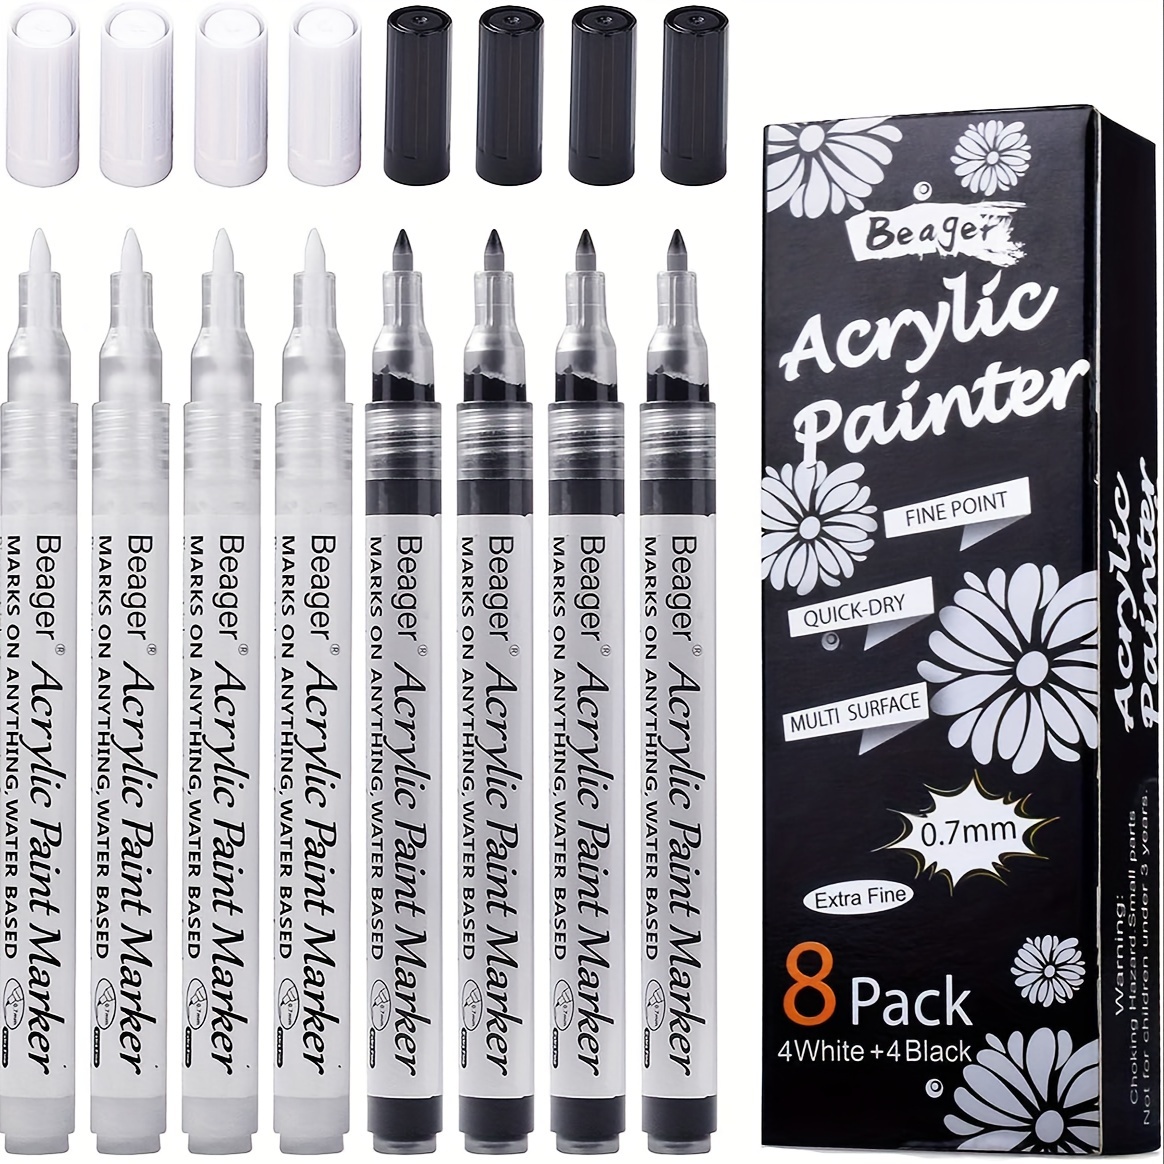 Acrylic Paint Markers, 3 Black 3 White Paint Pens for Rock Painting, Stone, Glass, Wood, Canva, Metal, Ceramic, Graffiti, Paper, Drawing, Medium Tip